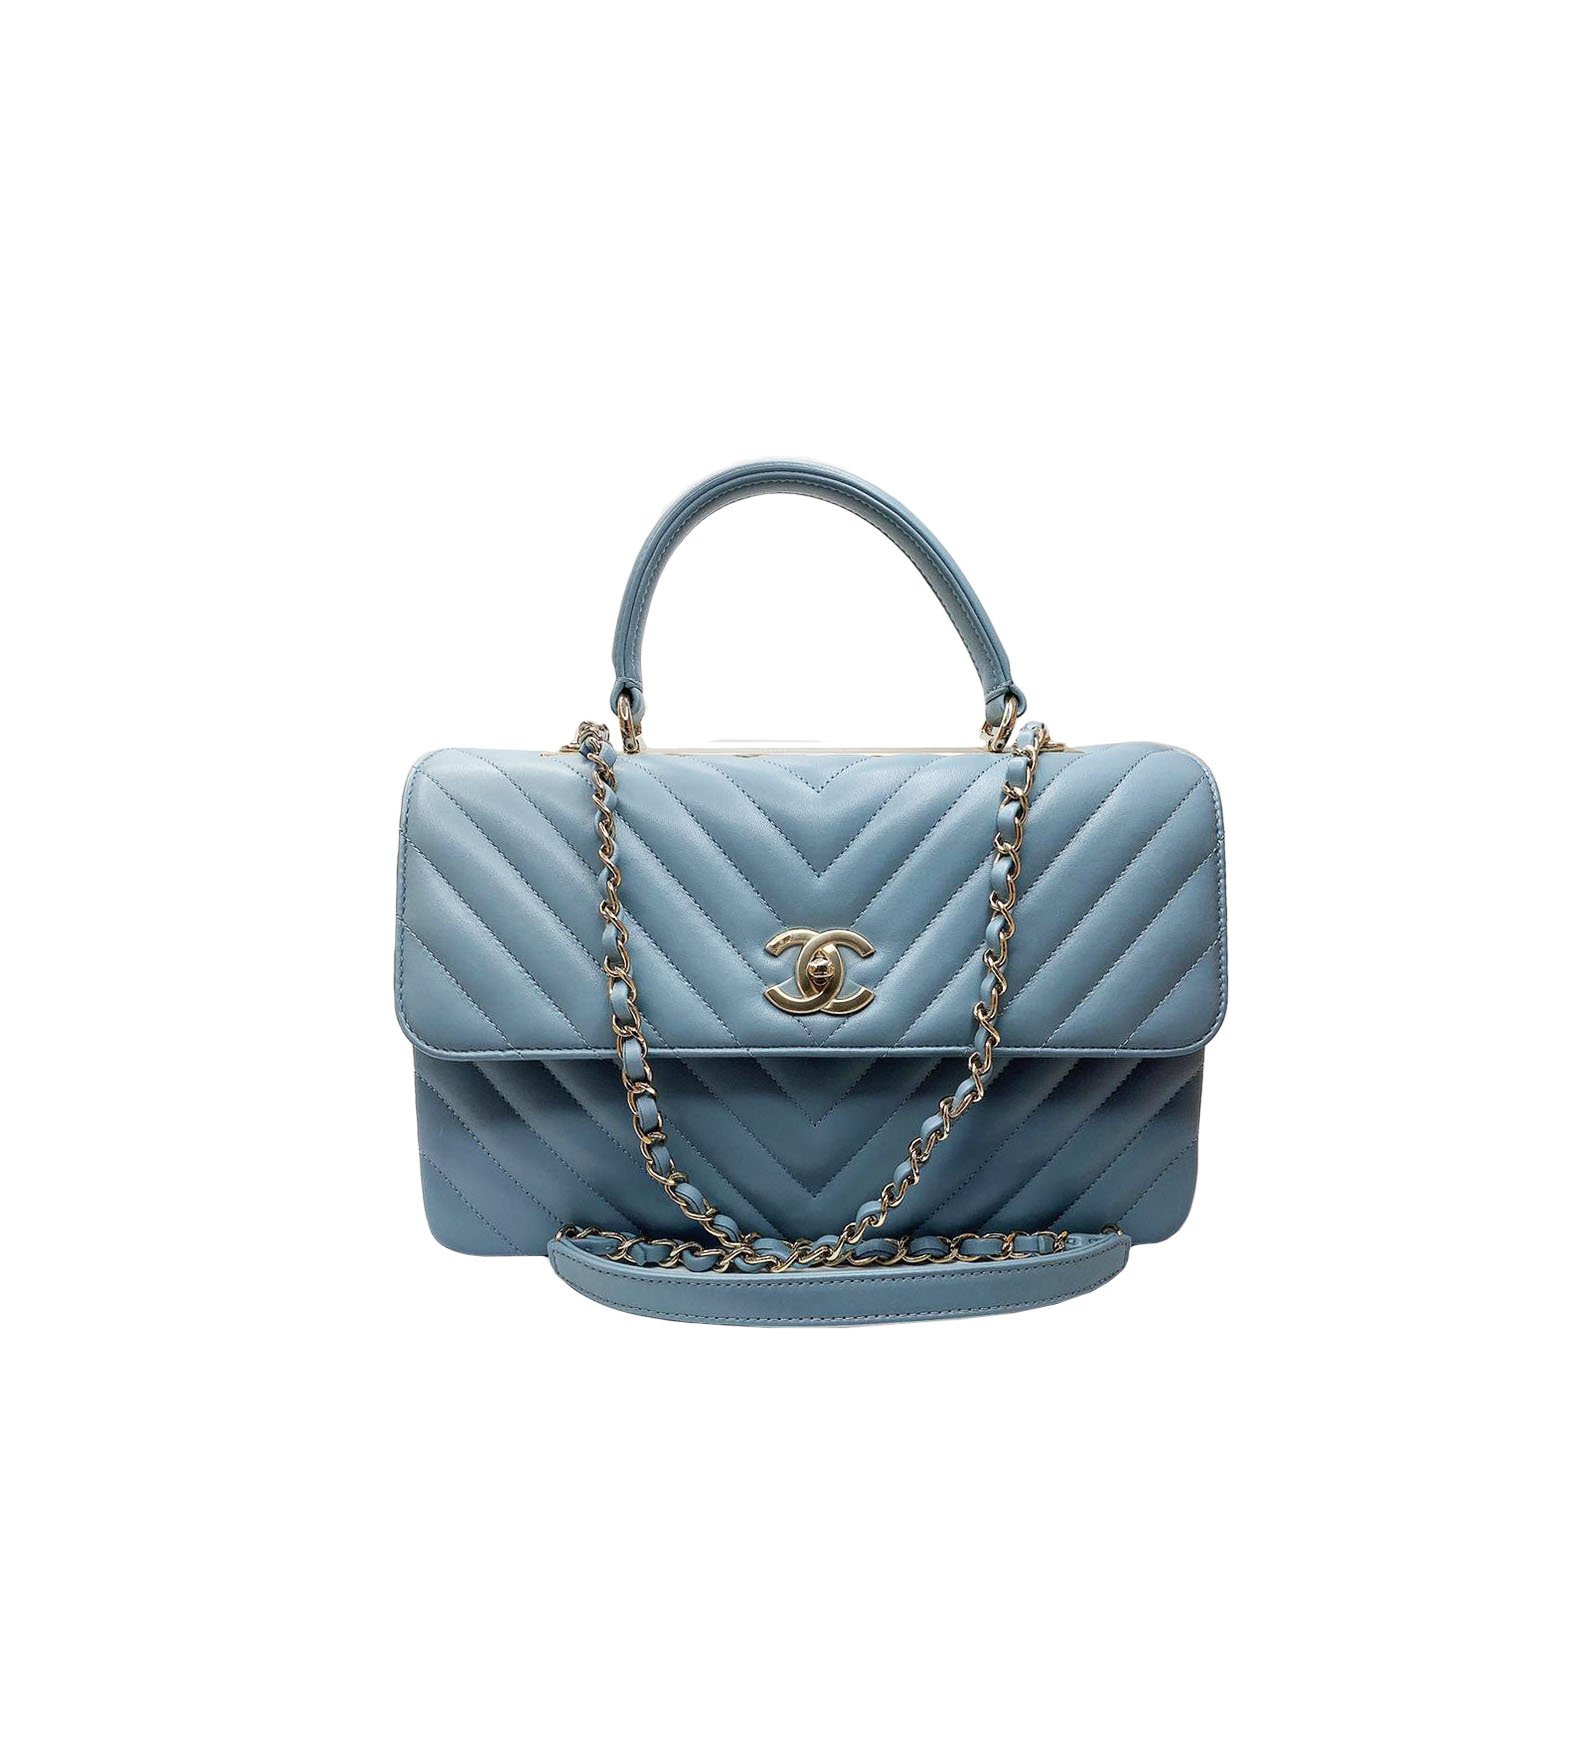 LIGHT BLUE QUILTED LEATHER MEDIUM TRENDY CC FLAP SHOULDER BAG - styleforless